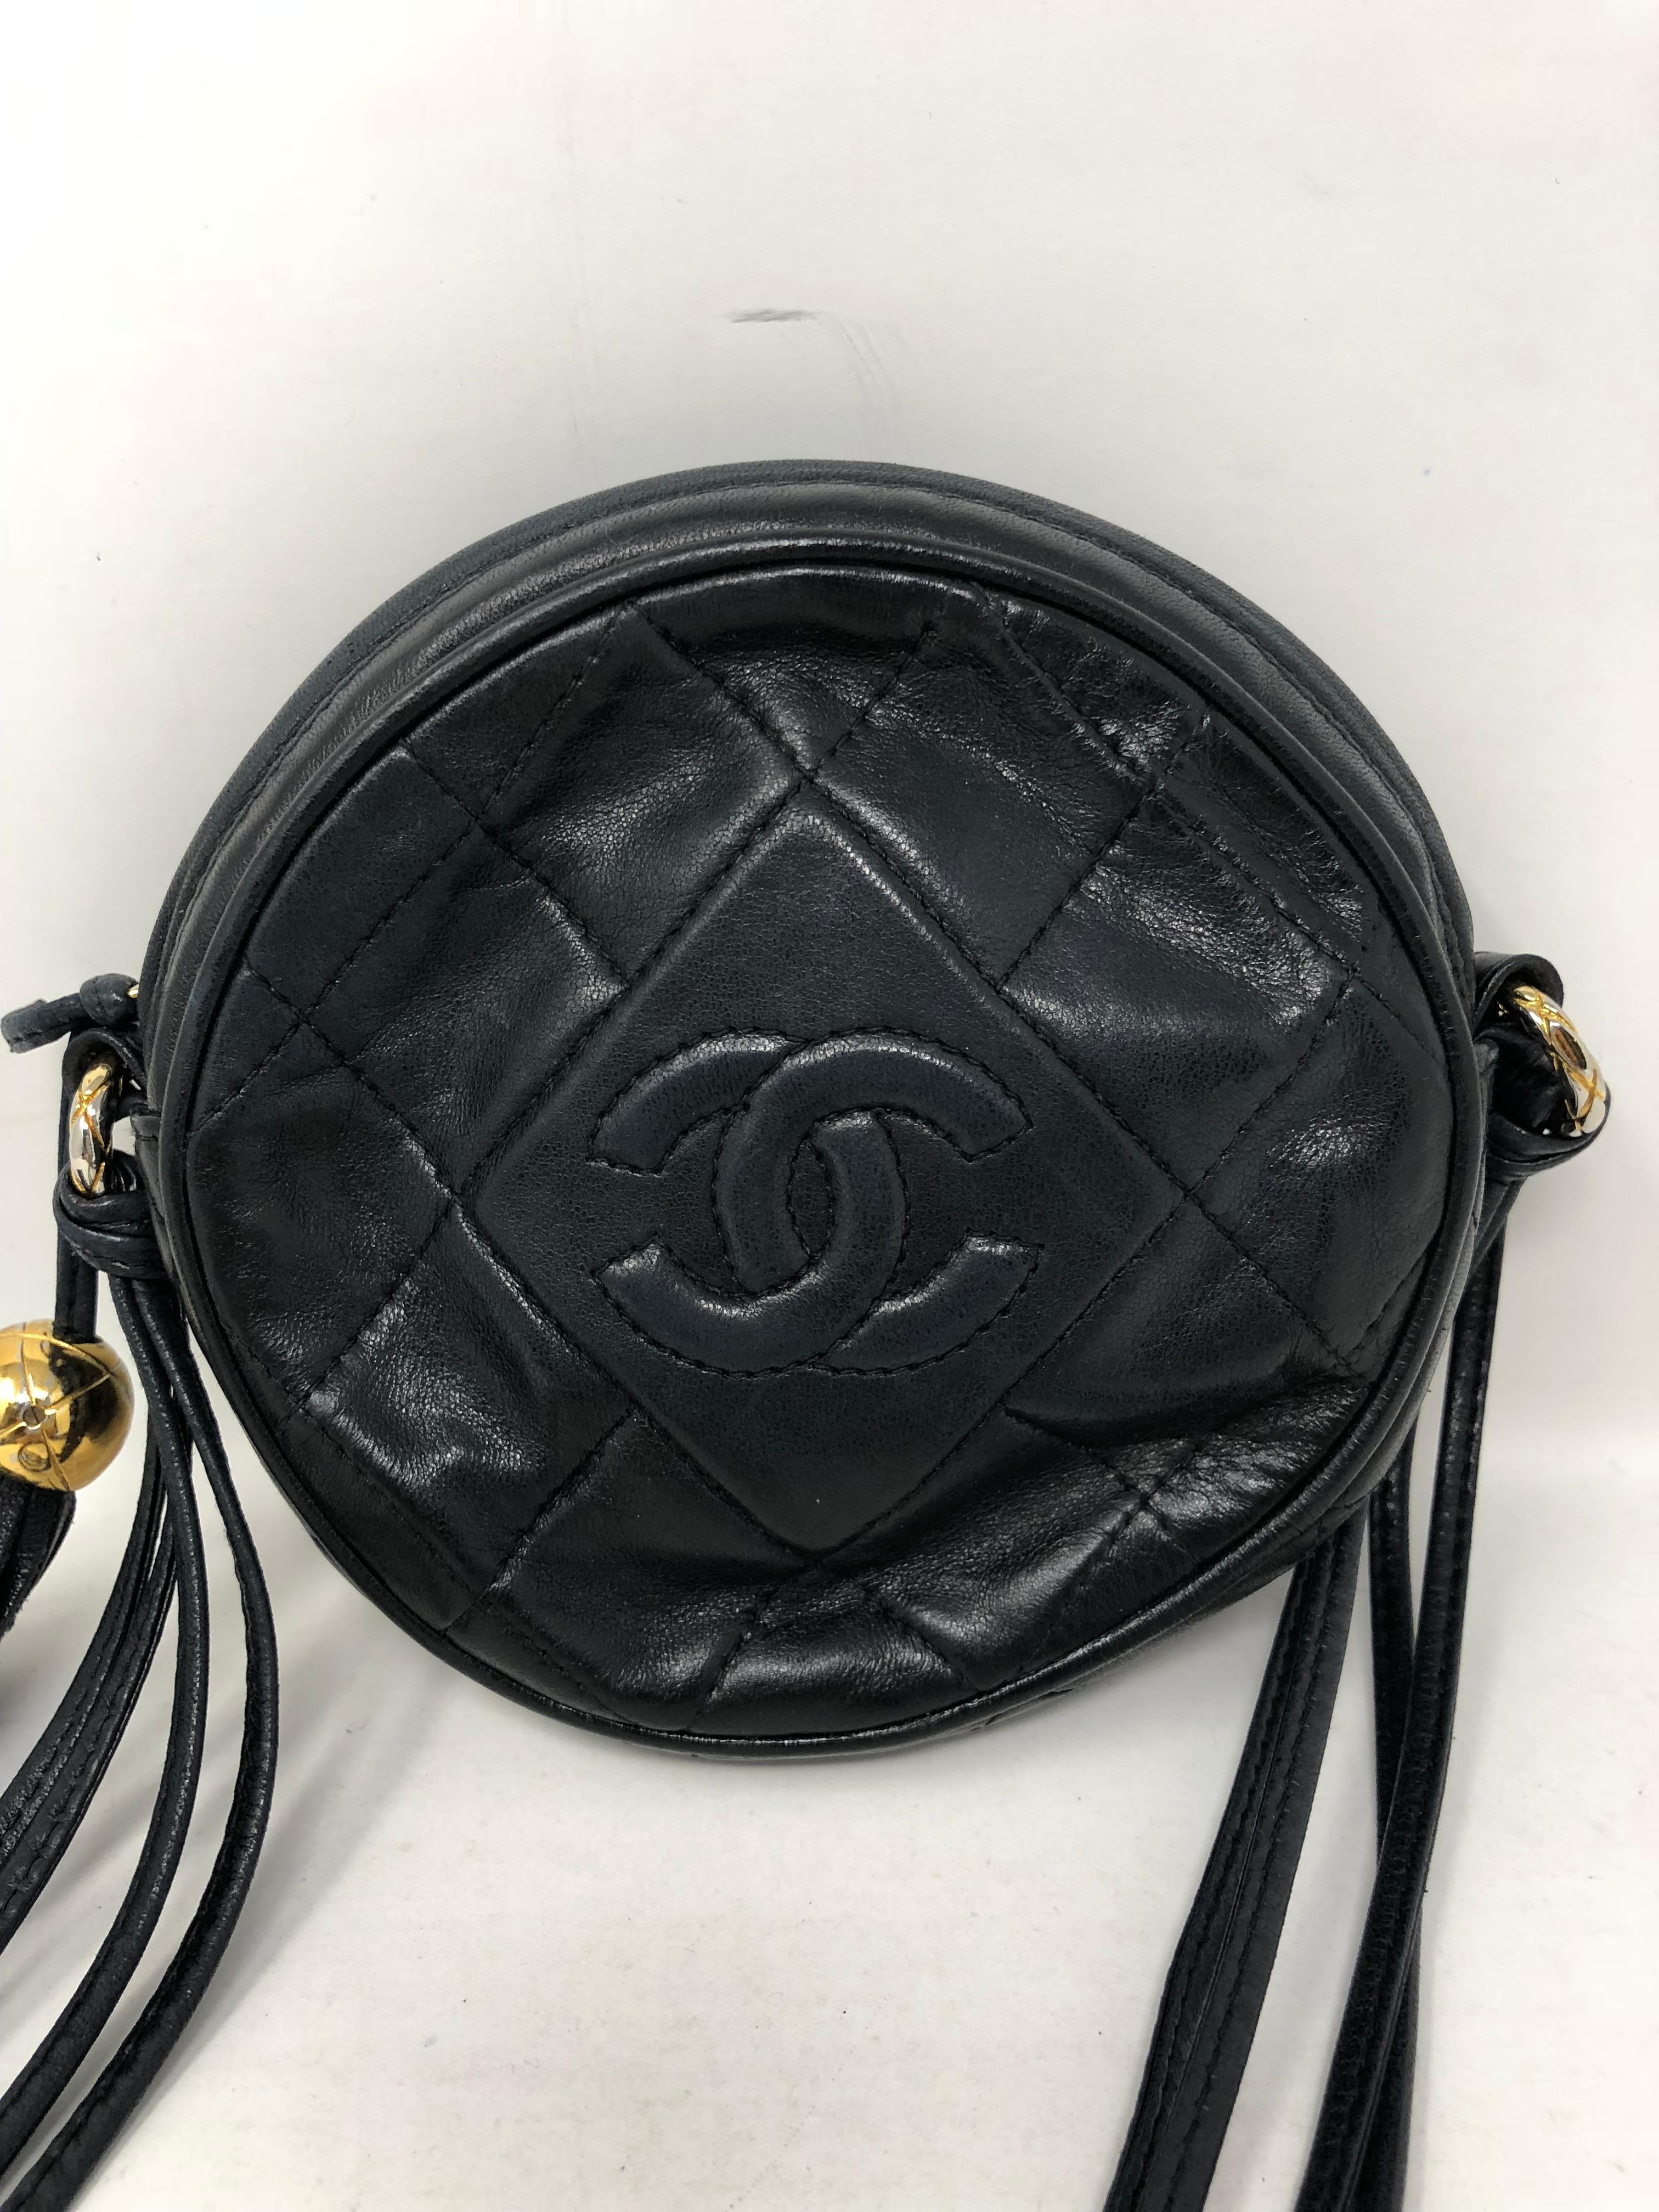 Vintage Chanel Black Chanel Crossbody with tassel. Mini circular bag that can be adjusted on strap. Matelasse Chanel lambskin with gold hardware. Cutest style by Chanel. Guaranteed authentic. 